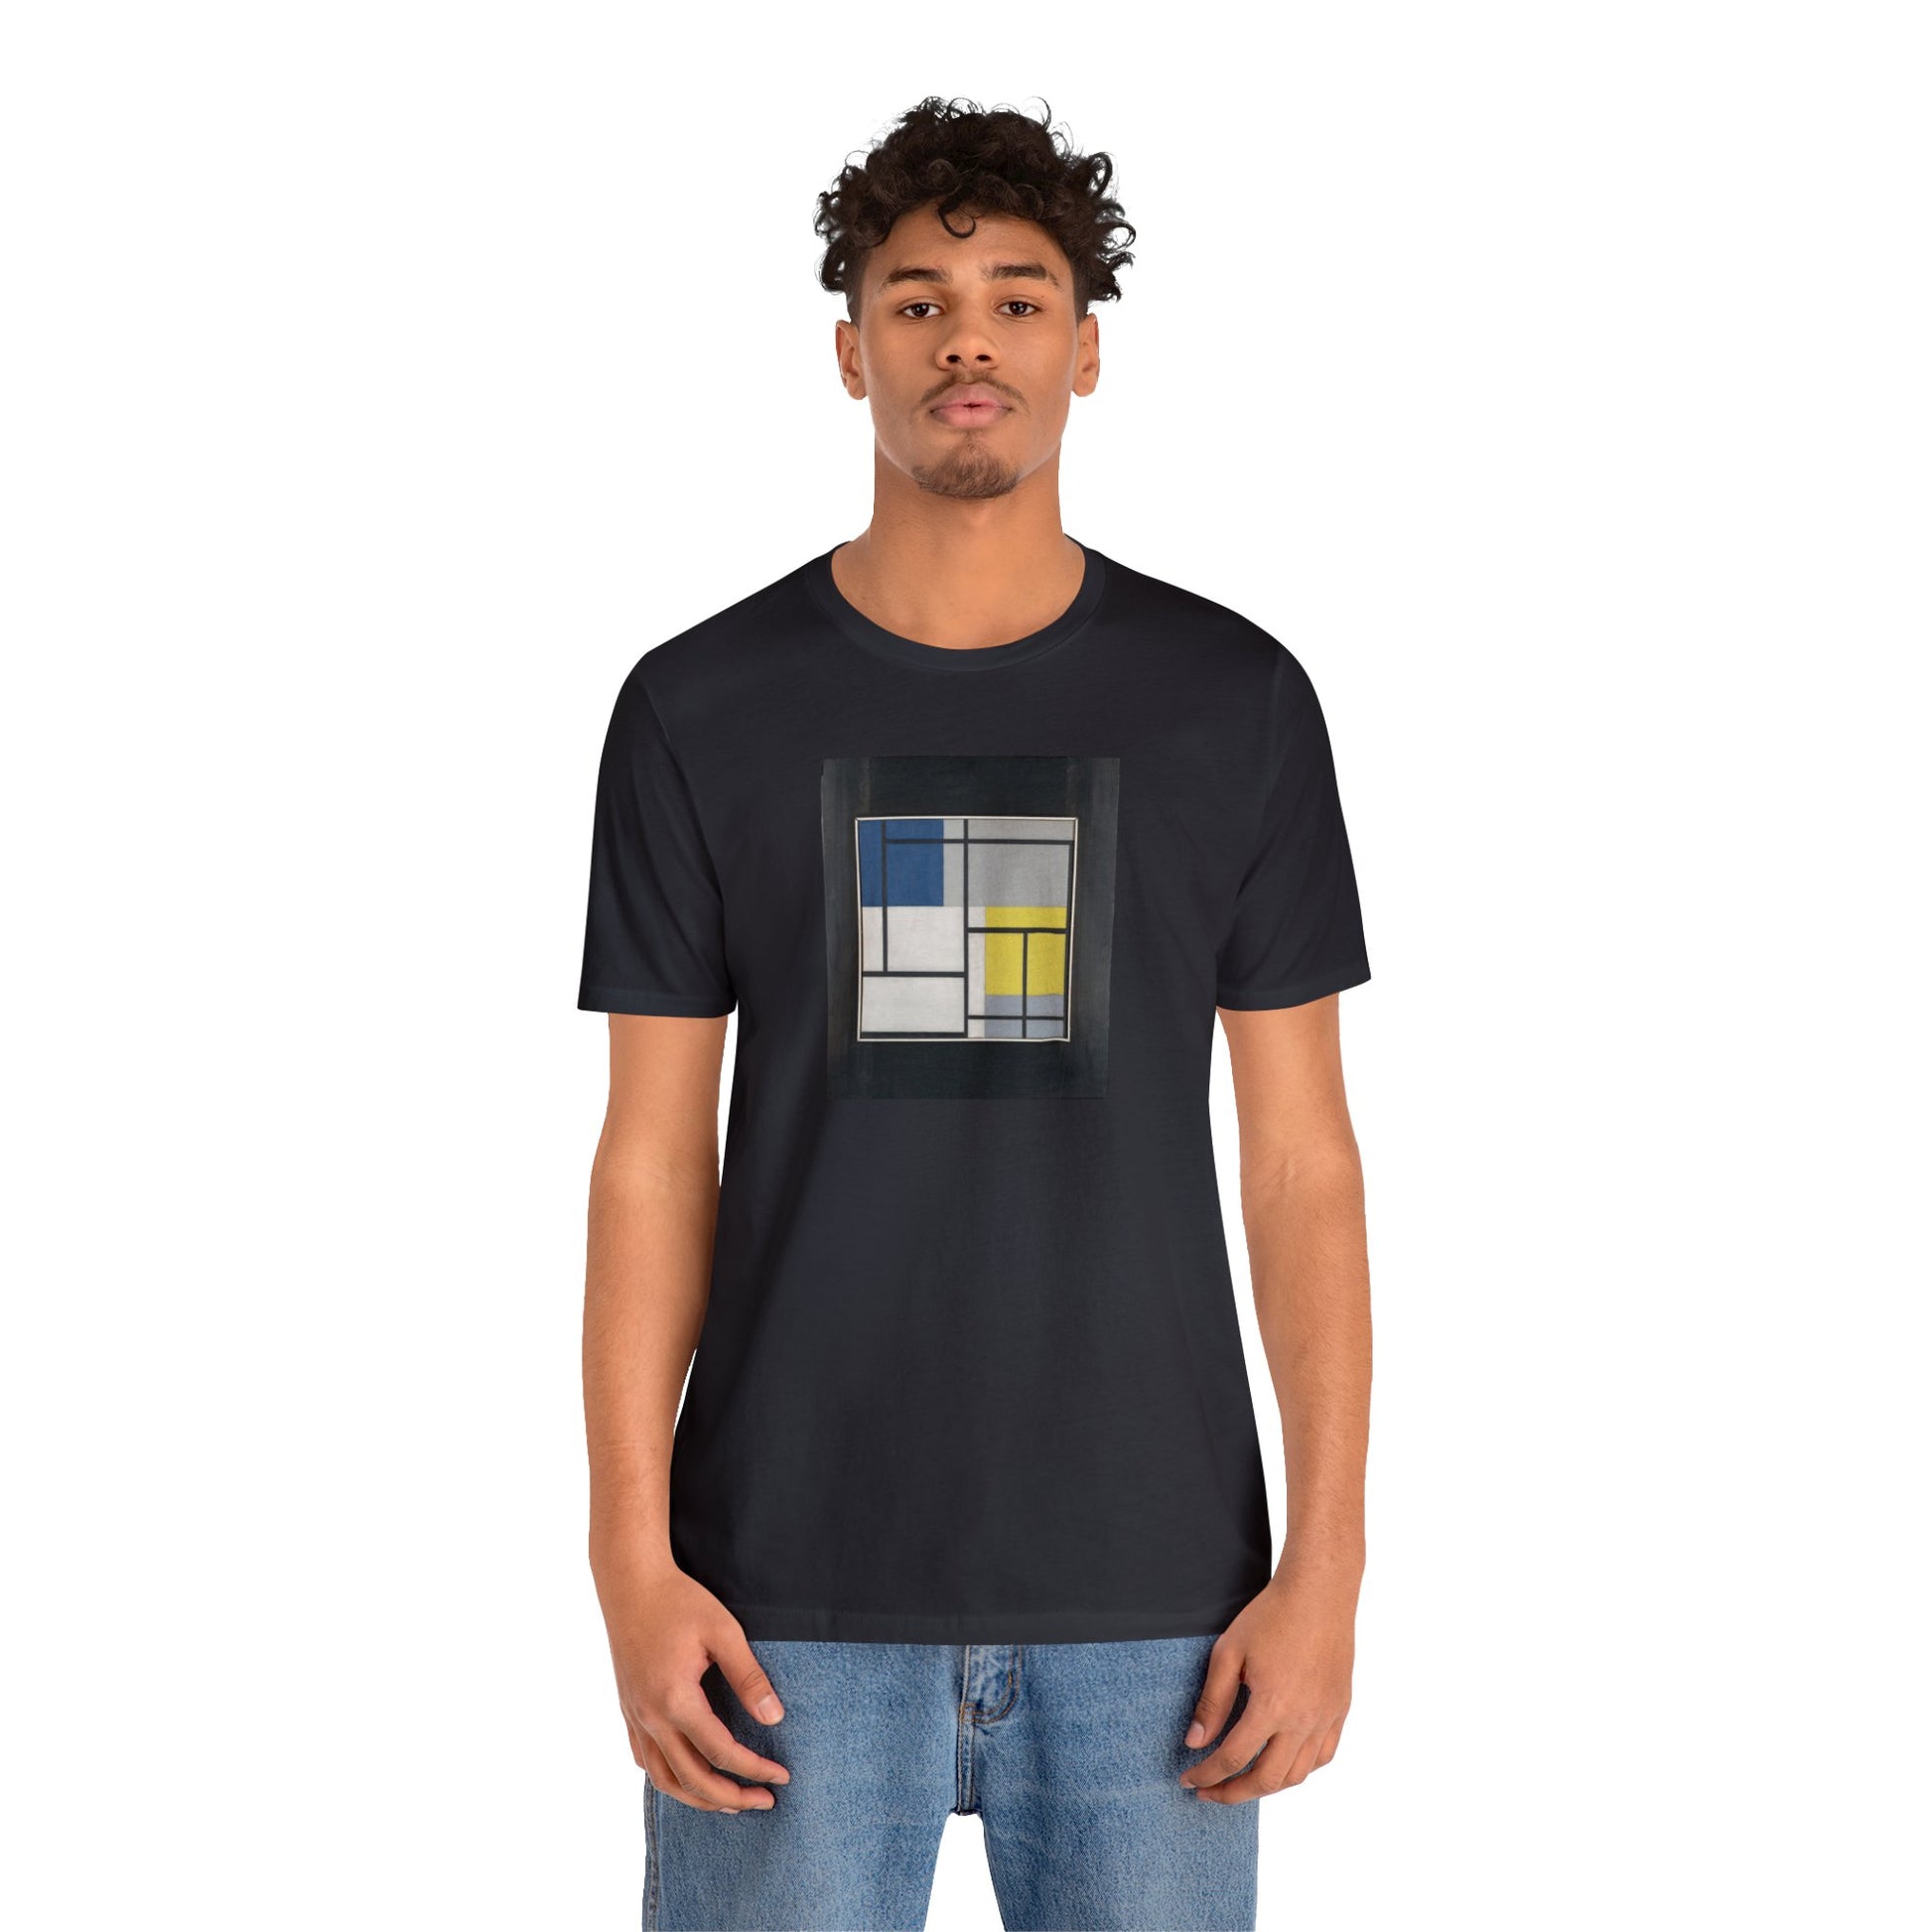 THEOVAN DOESBURG - SIMULTANEOUS COMPOSITION - UNISEX JERSEY T-SHIRT